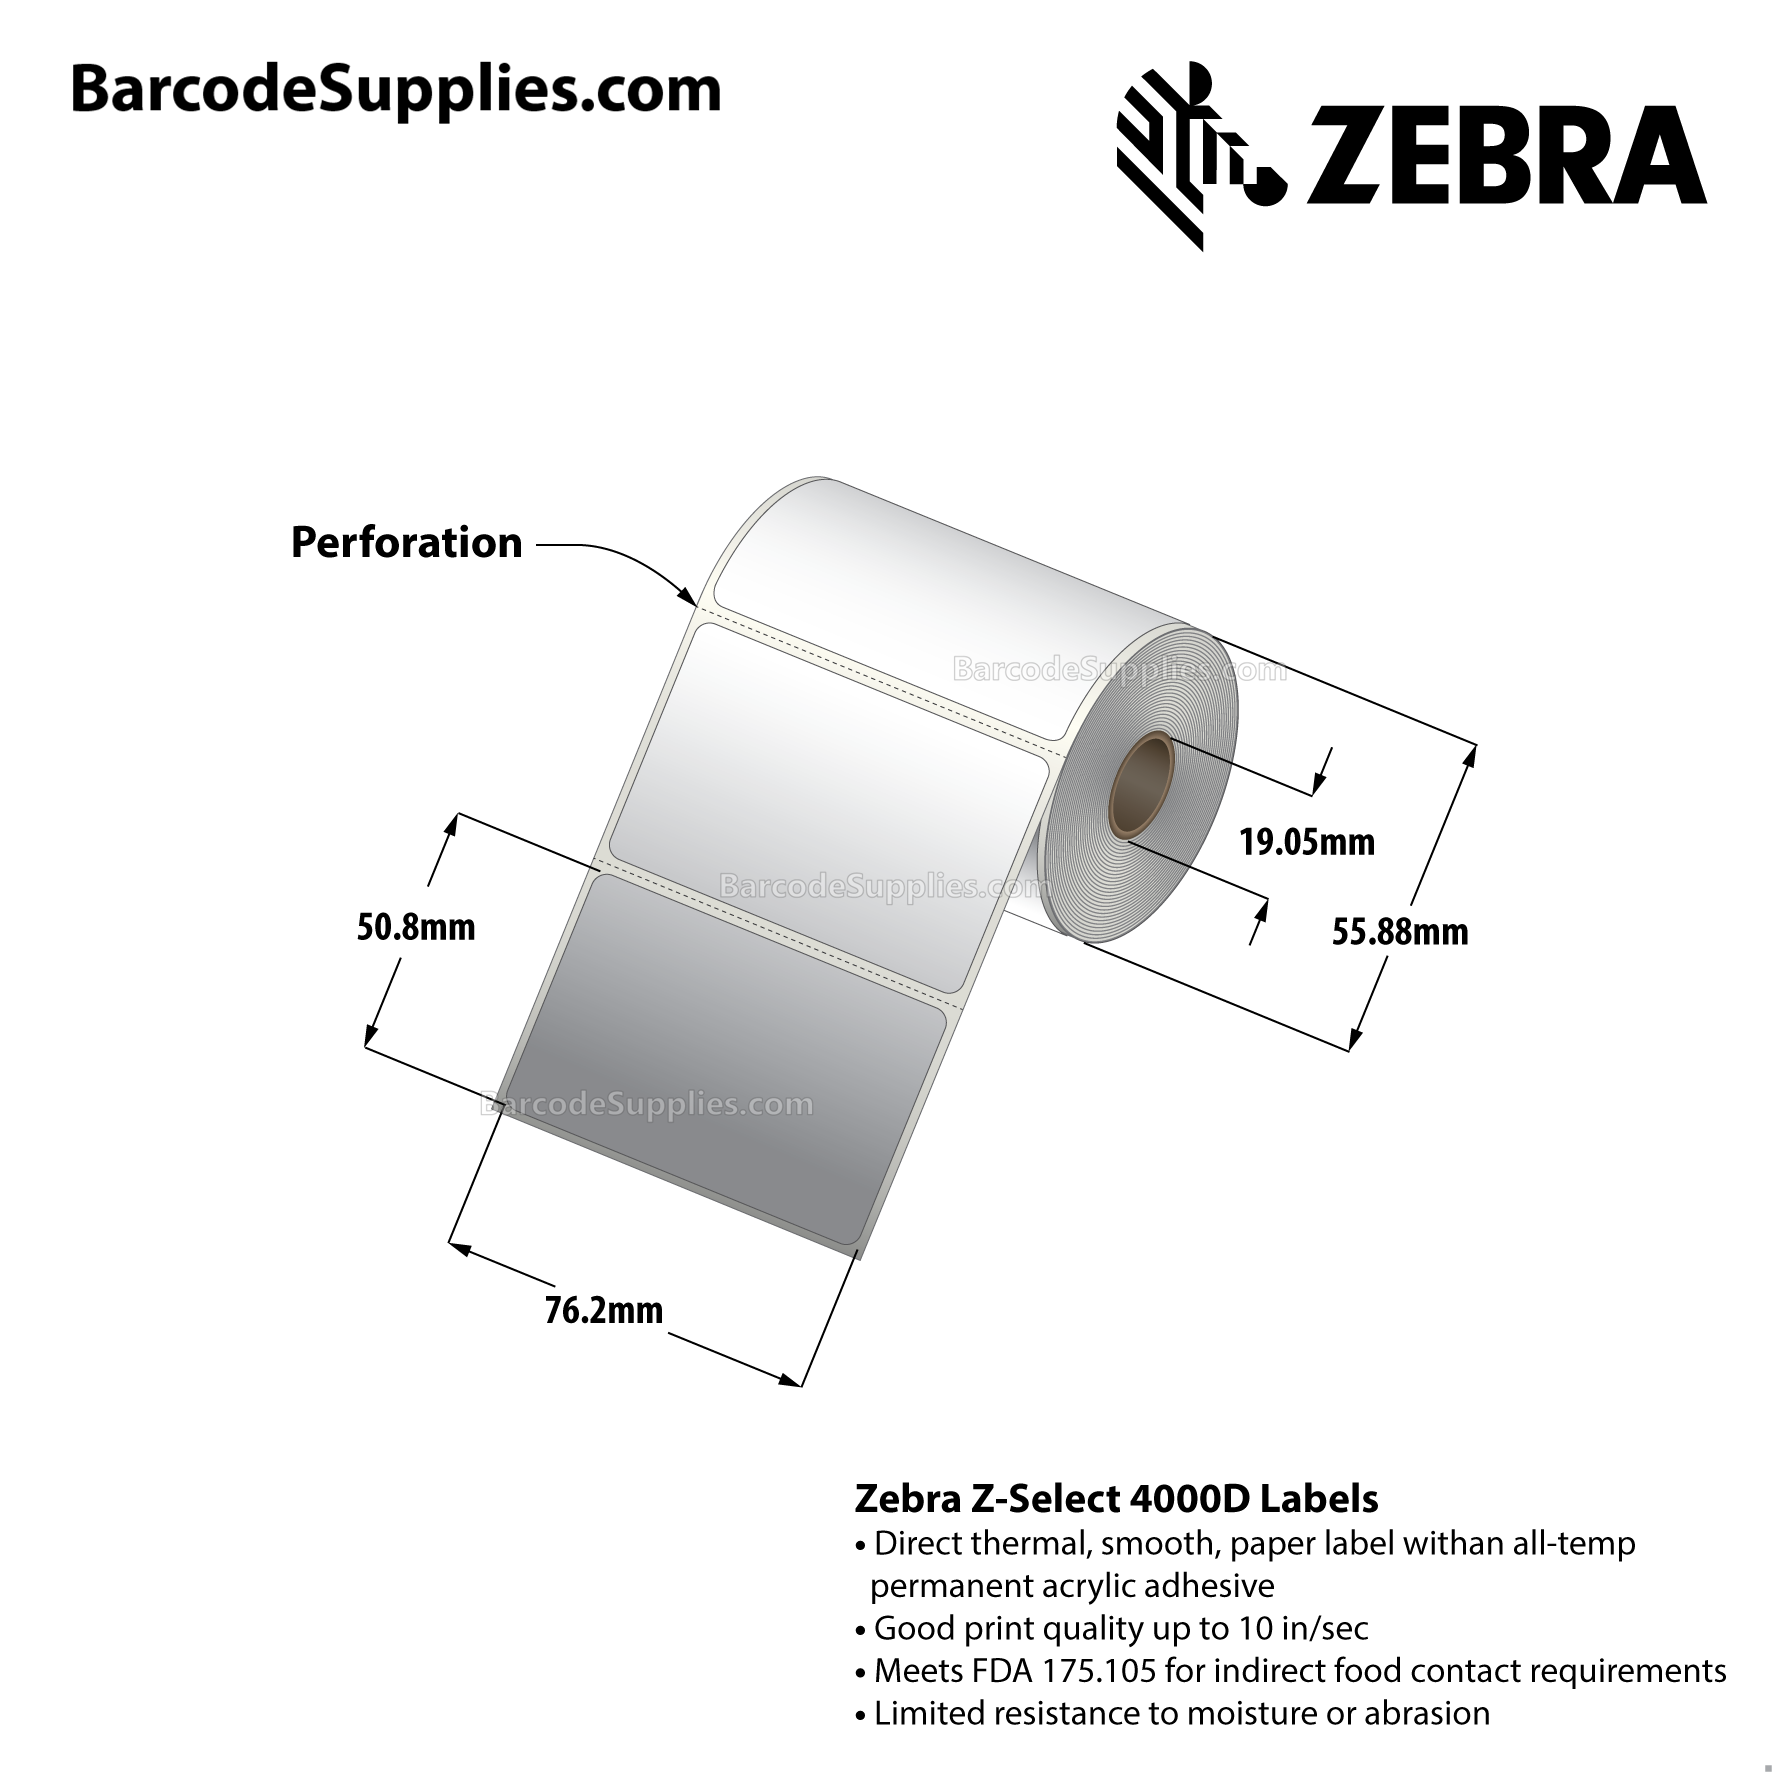 Products 3 x 2 Direct Thermal White Z-Select 4000D Labels With All-Temp Adhesive - Perforated - 210 Labels Per Roll - Carton Of 36 Rolls - 7560 Labels Total - MPN: 10001962